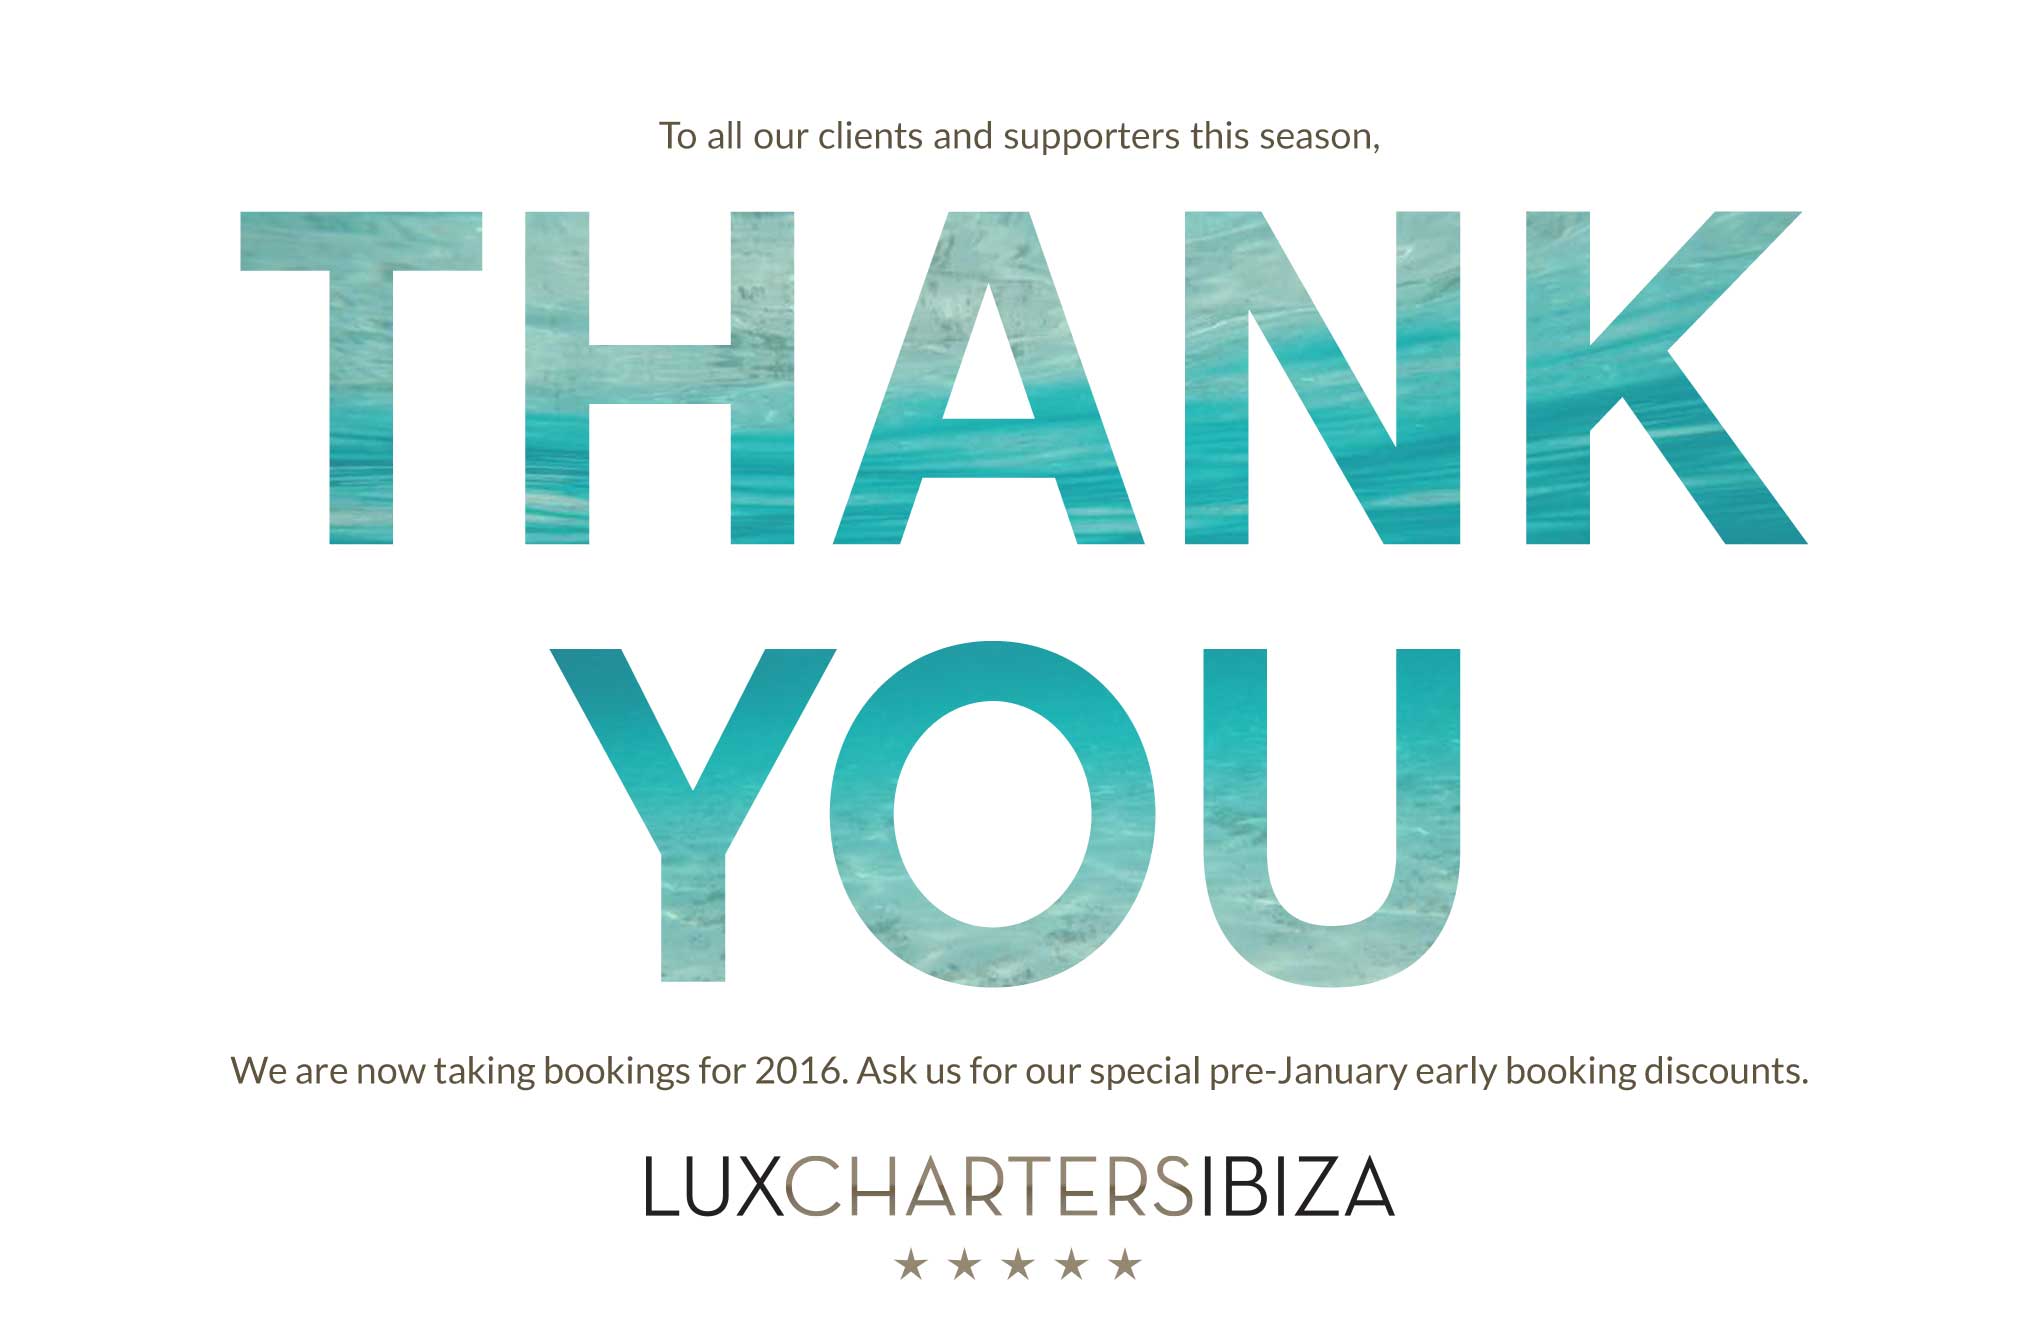 LUX CHARTERS IBIZA WRAPS UP 2015